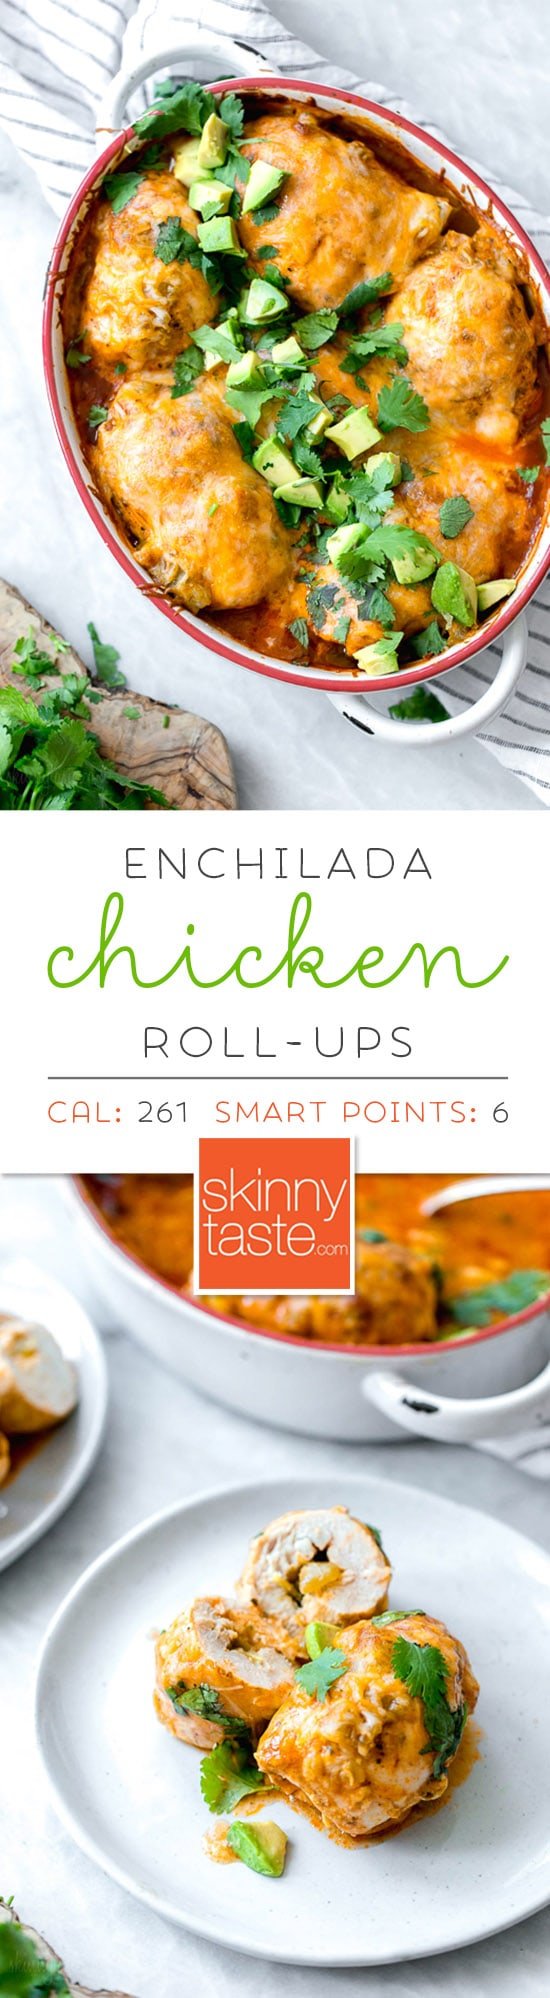 Chicken breasts on their own can be a bit boring. Roll ‘em up with cheese and green chilis, smother them in enchilada sauce and more cheese and now you’re talking. These Enchilada Chicken Roll-Ups give you authentic enchilada flavor without all the work, calories or fat. And you won’t even miss the tortillas!